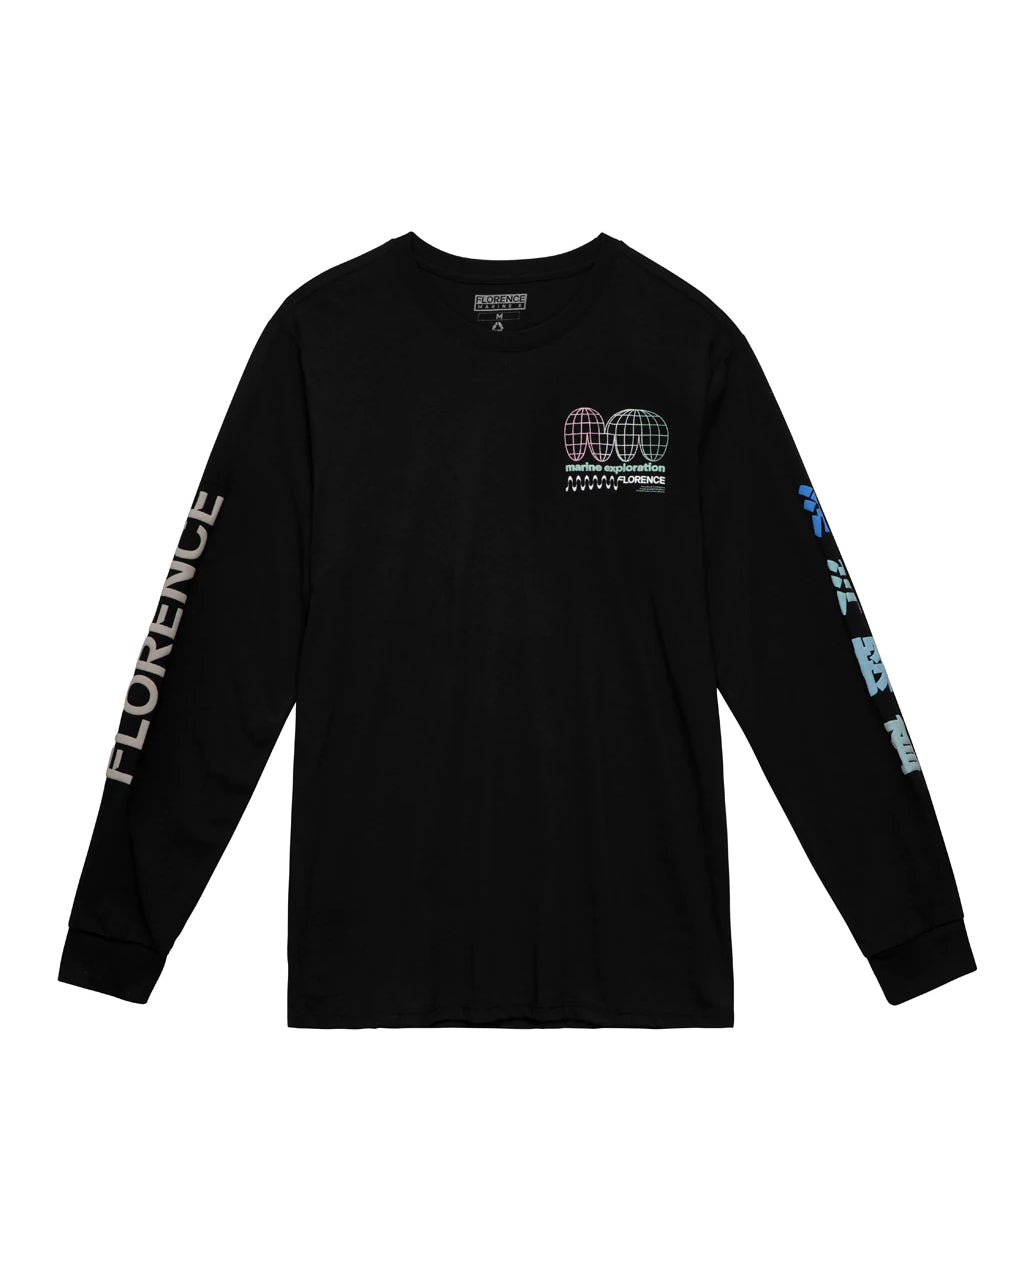 Florence Marine X Frontier Recover LS T-Shirt Black S